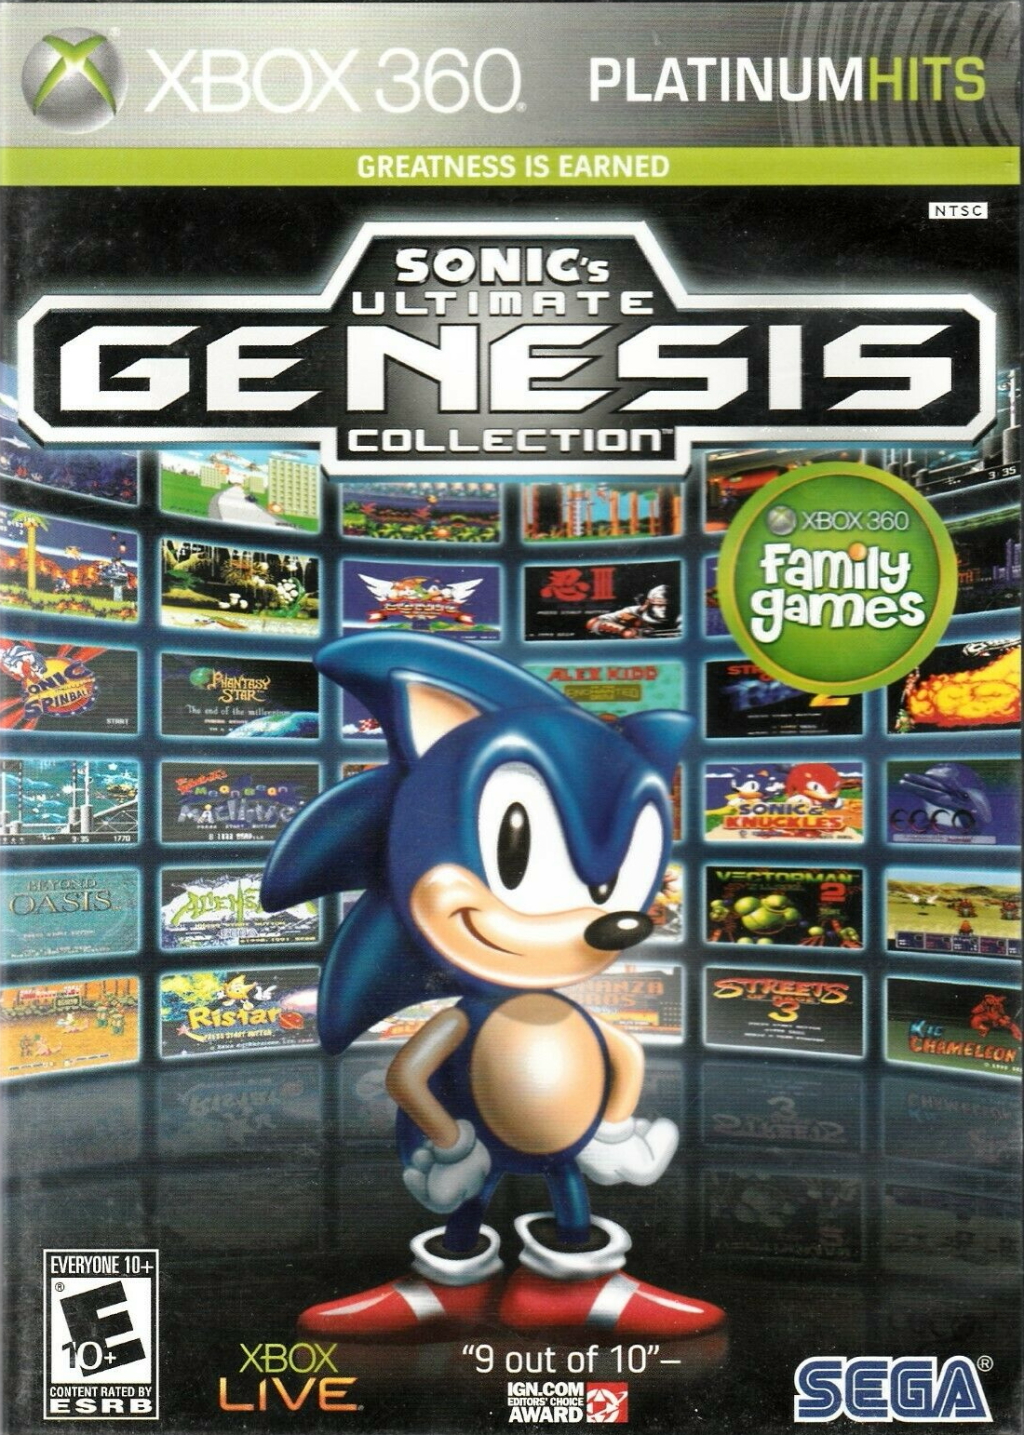 Sonic's Ultimate Genesis Collection - Platinum Hits - Xbox 360